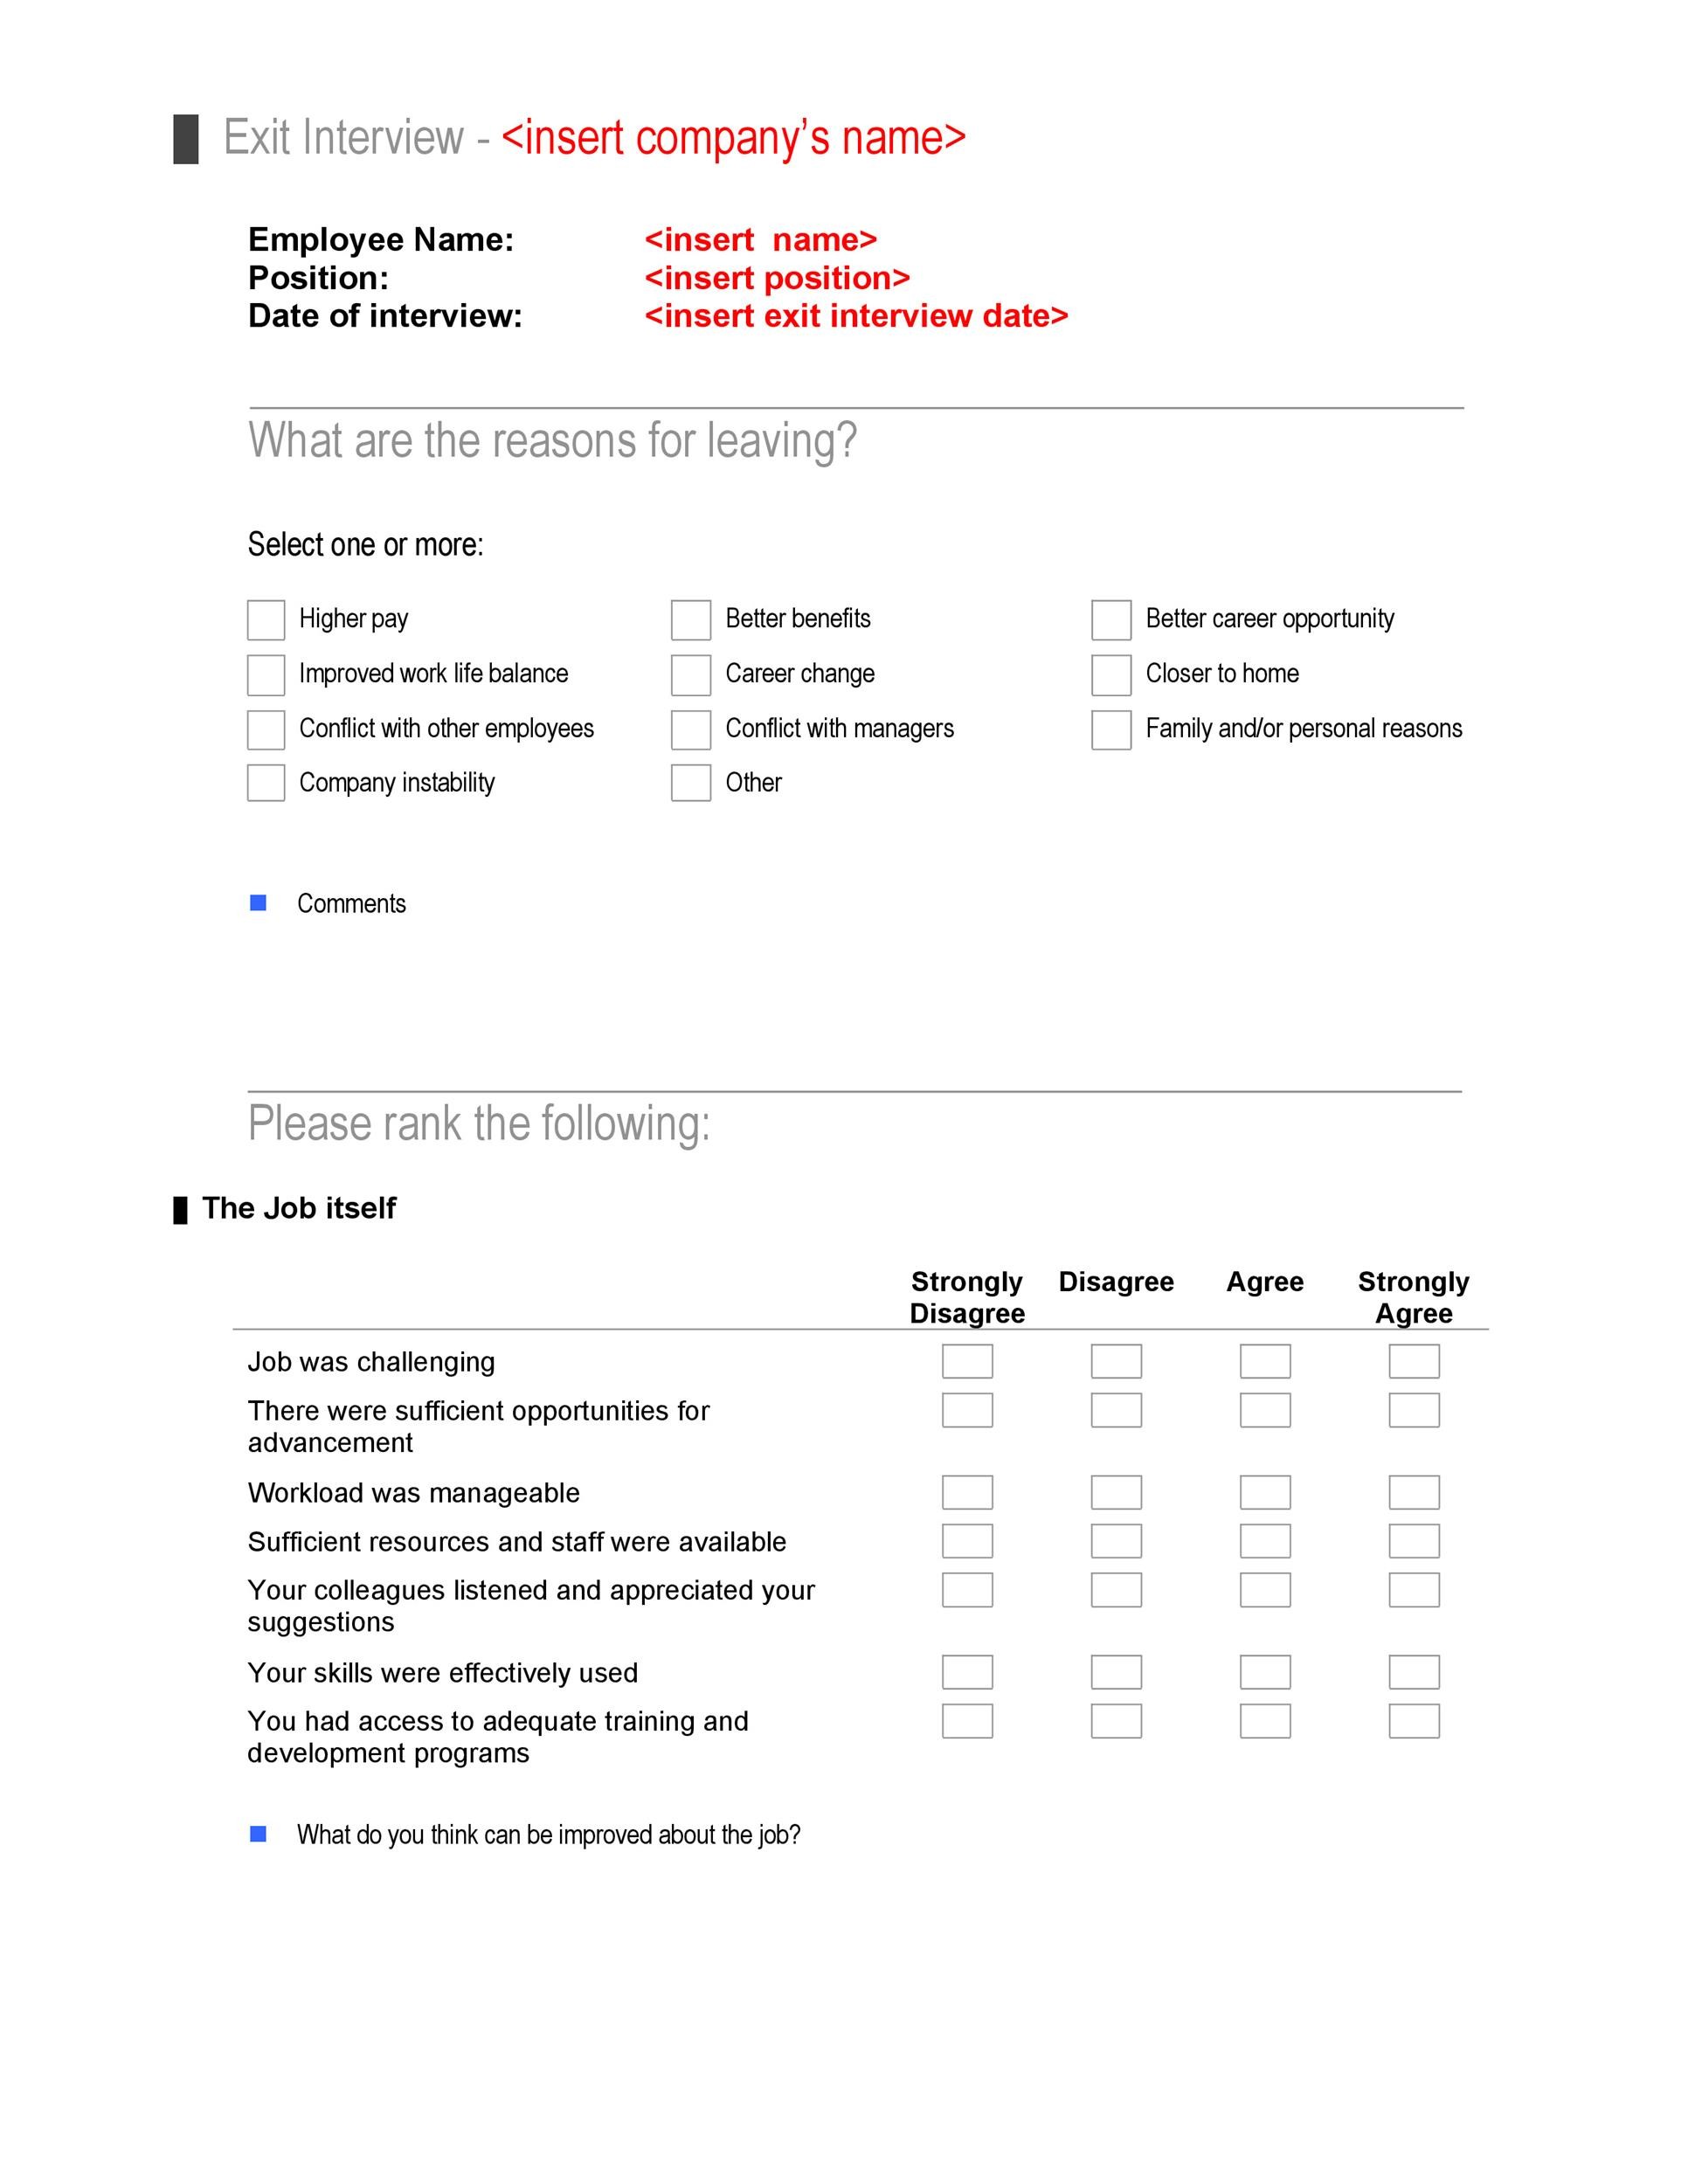 Free exit interview template 01